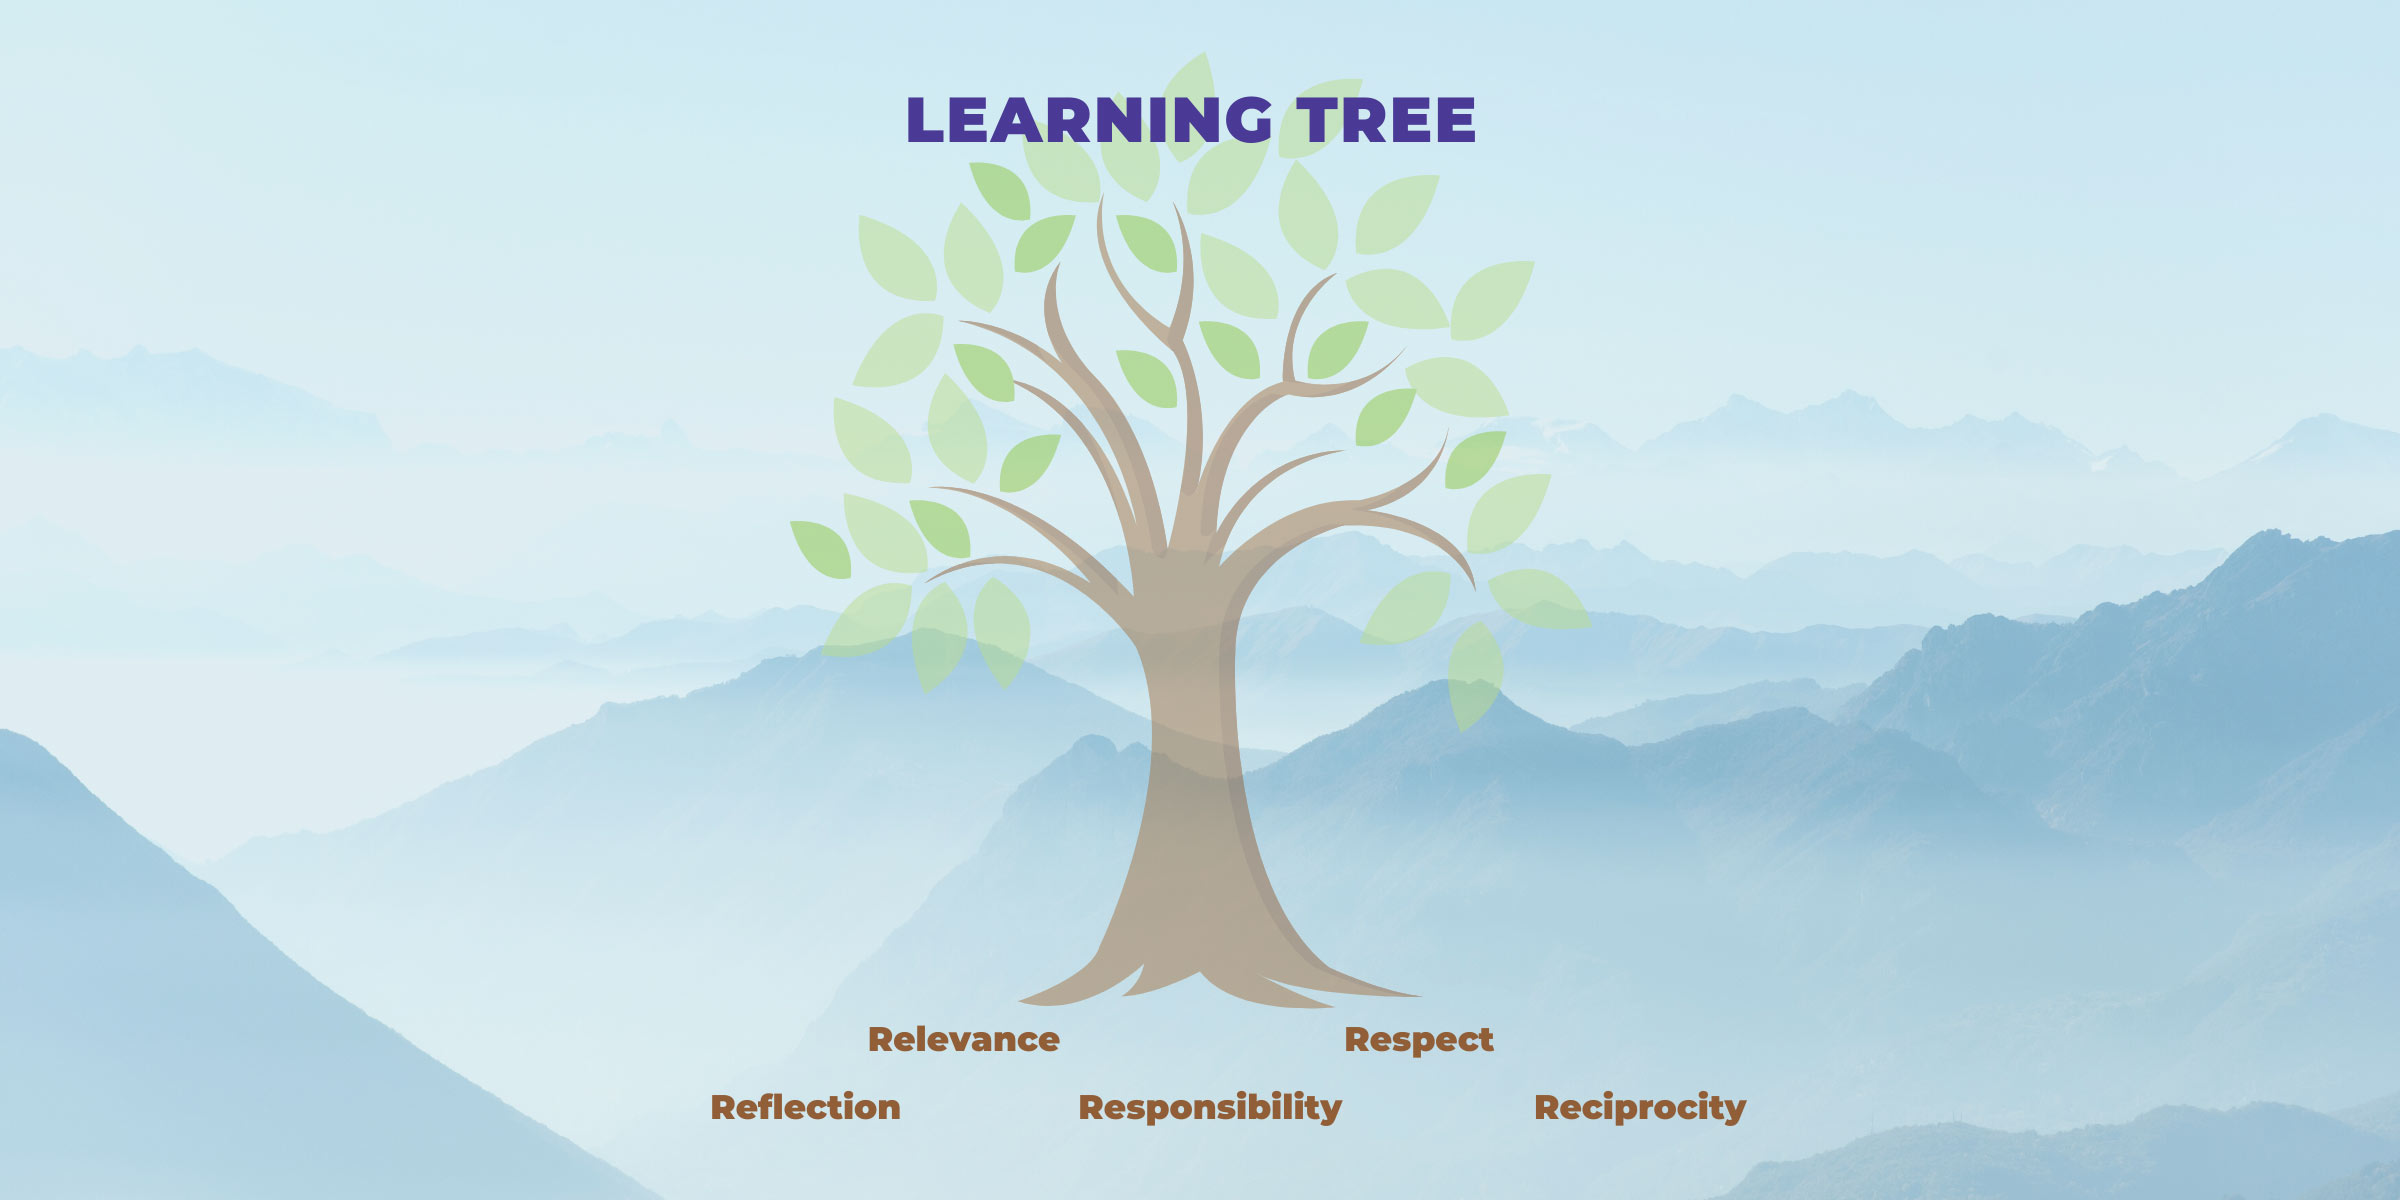 Learning-Tree-unlabelled